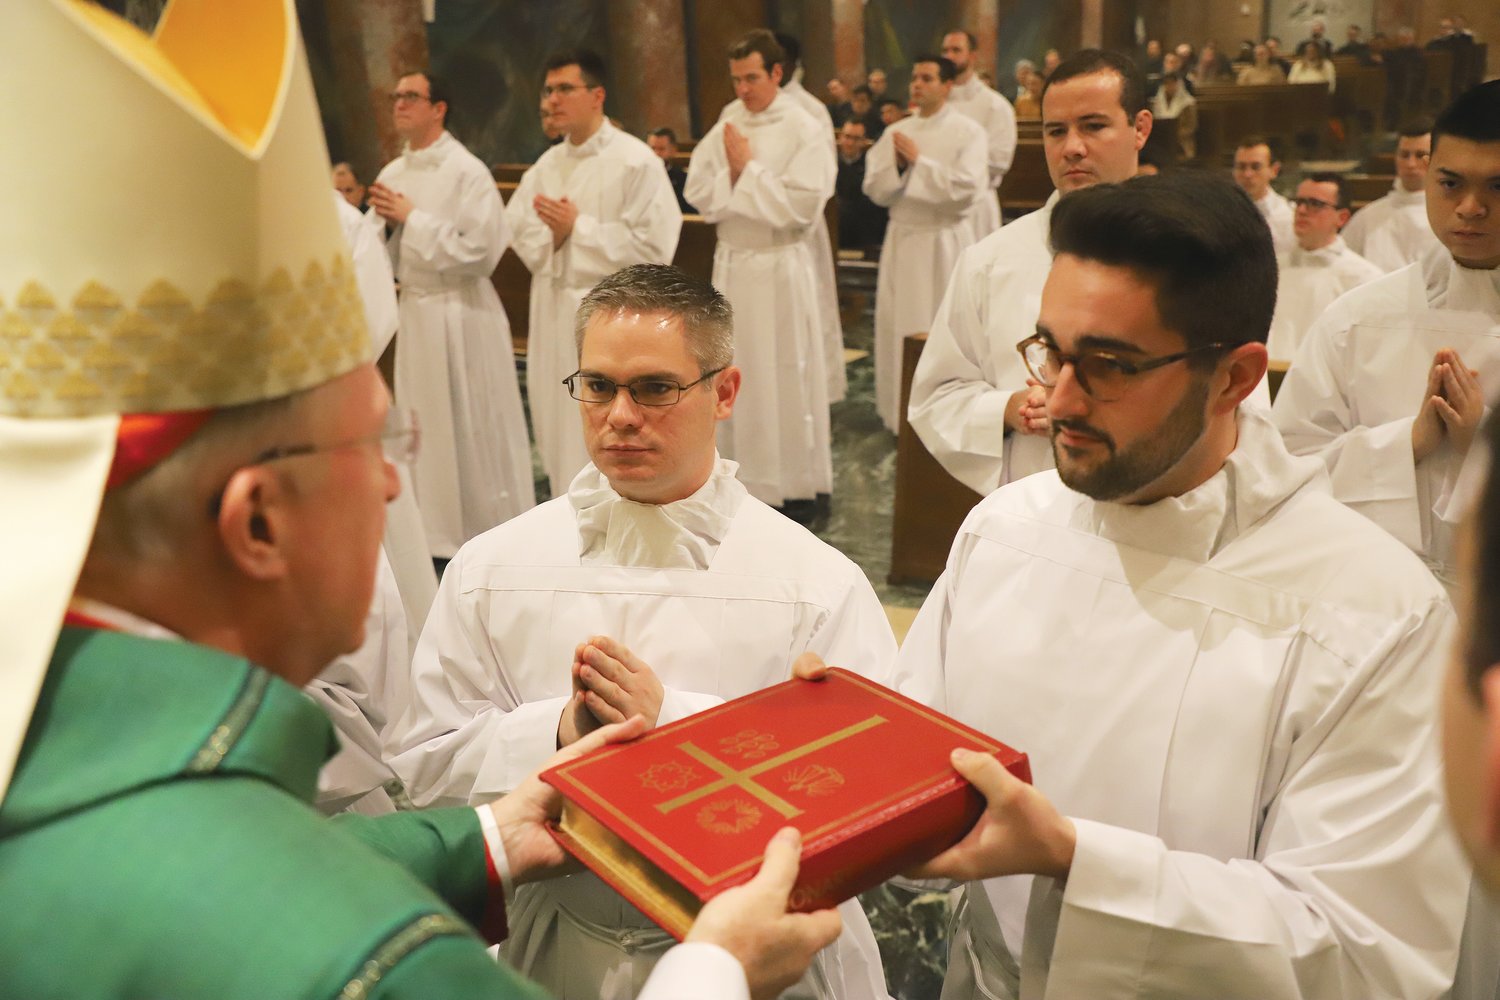 Twenty-five seminarians, including three young men from the Diocese of Providence: Stephen Coutcher, Nathan Ledoux and Mateusz Puzanowski receive the Ministry of Lector, conferred by His Eminence Arthur Cardinal Roche, Prefect of the Dicastery for Divine Worship and the Discipline of the Sacraments on January 15 in Rome.